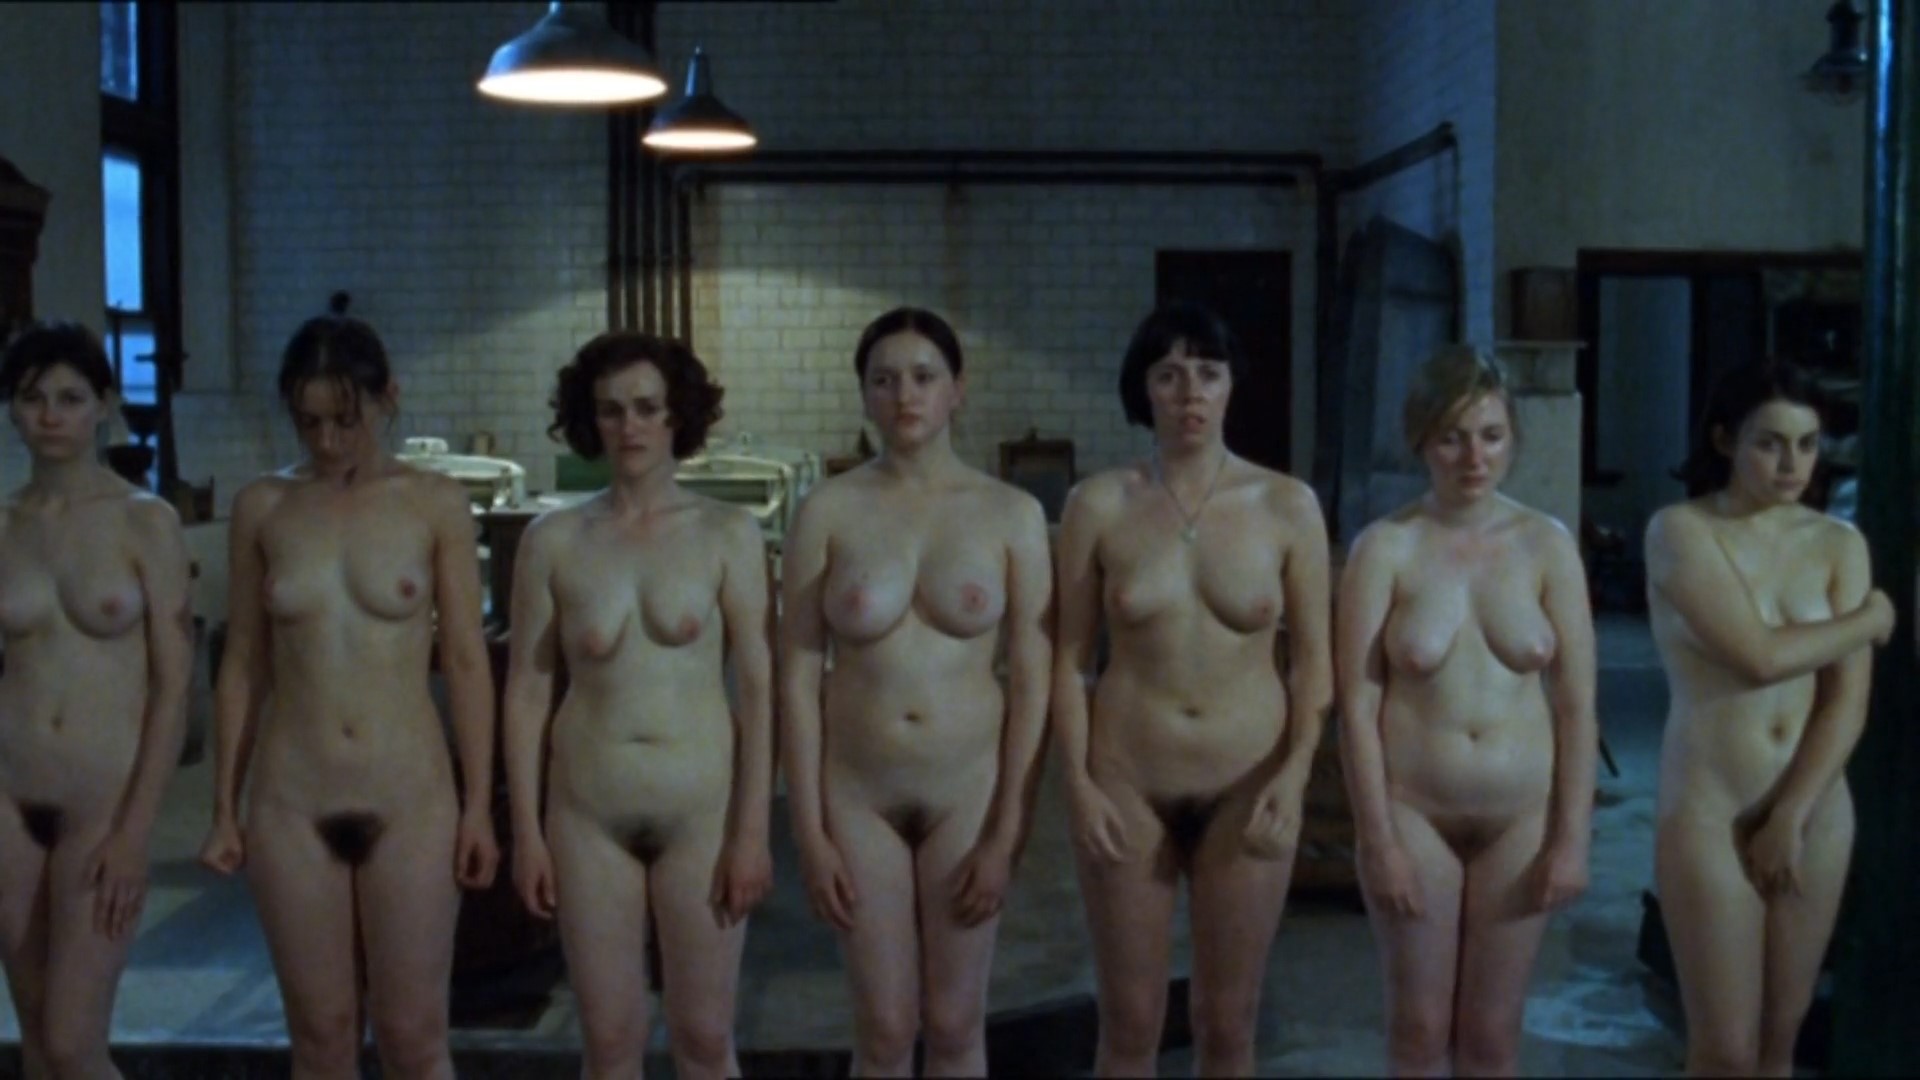 Autopsy nudity doe the jane of The Autopsy